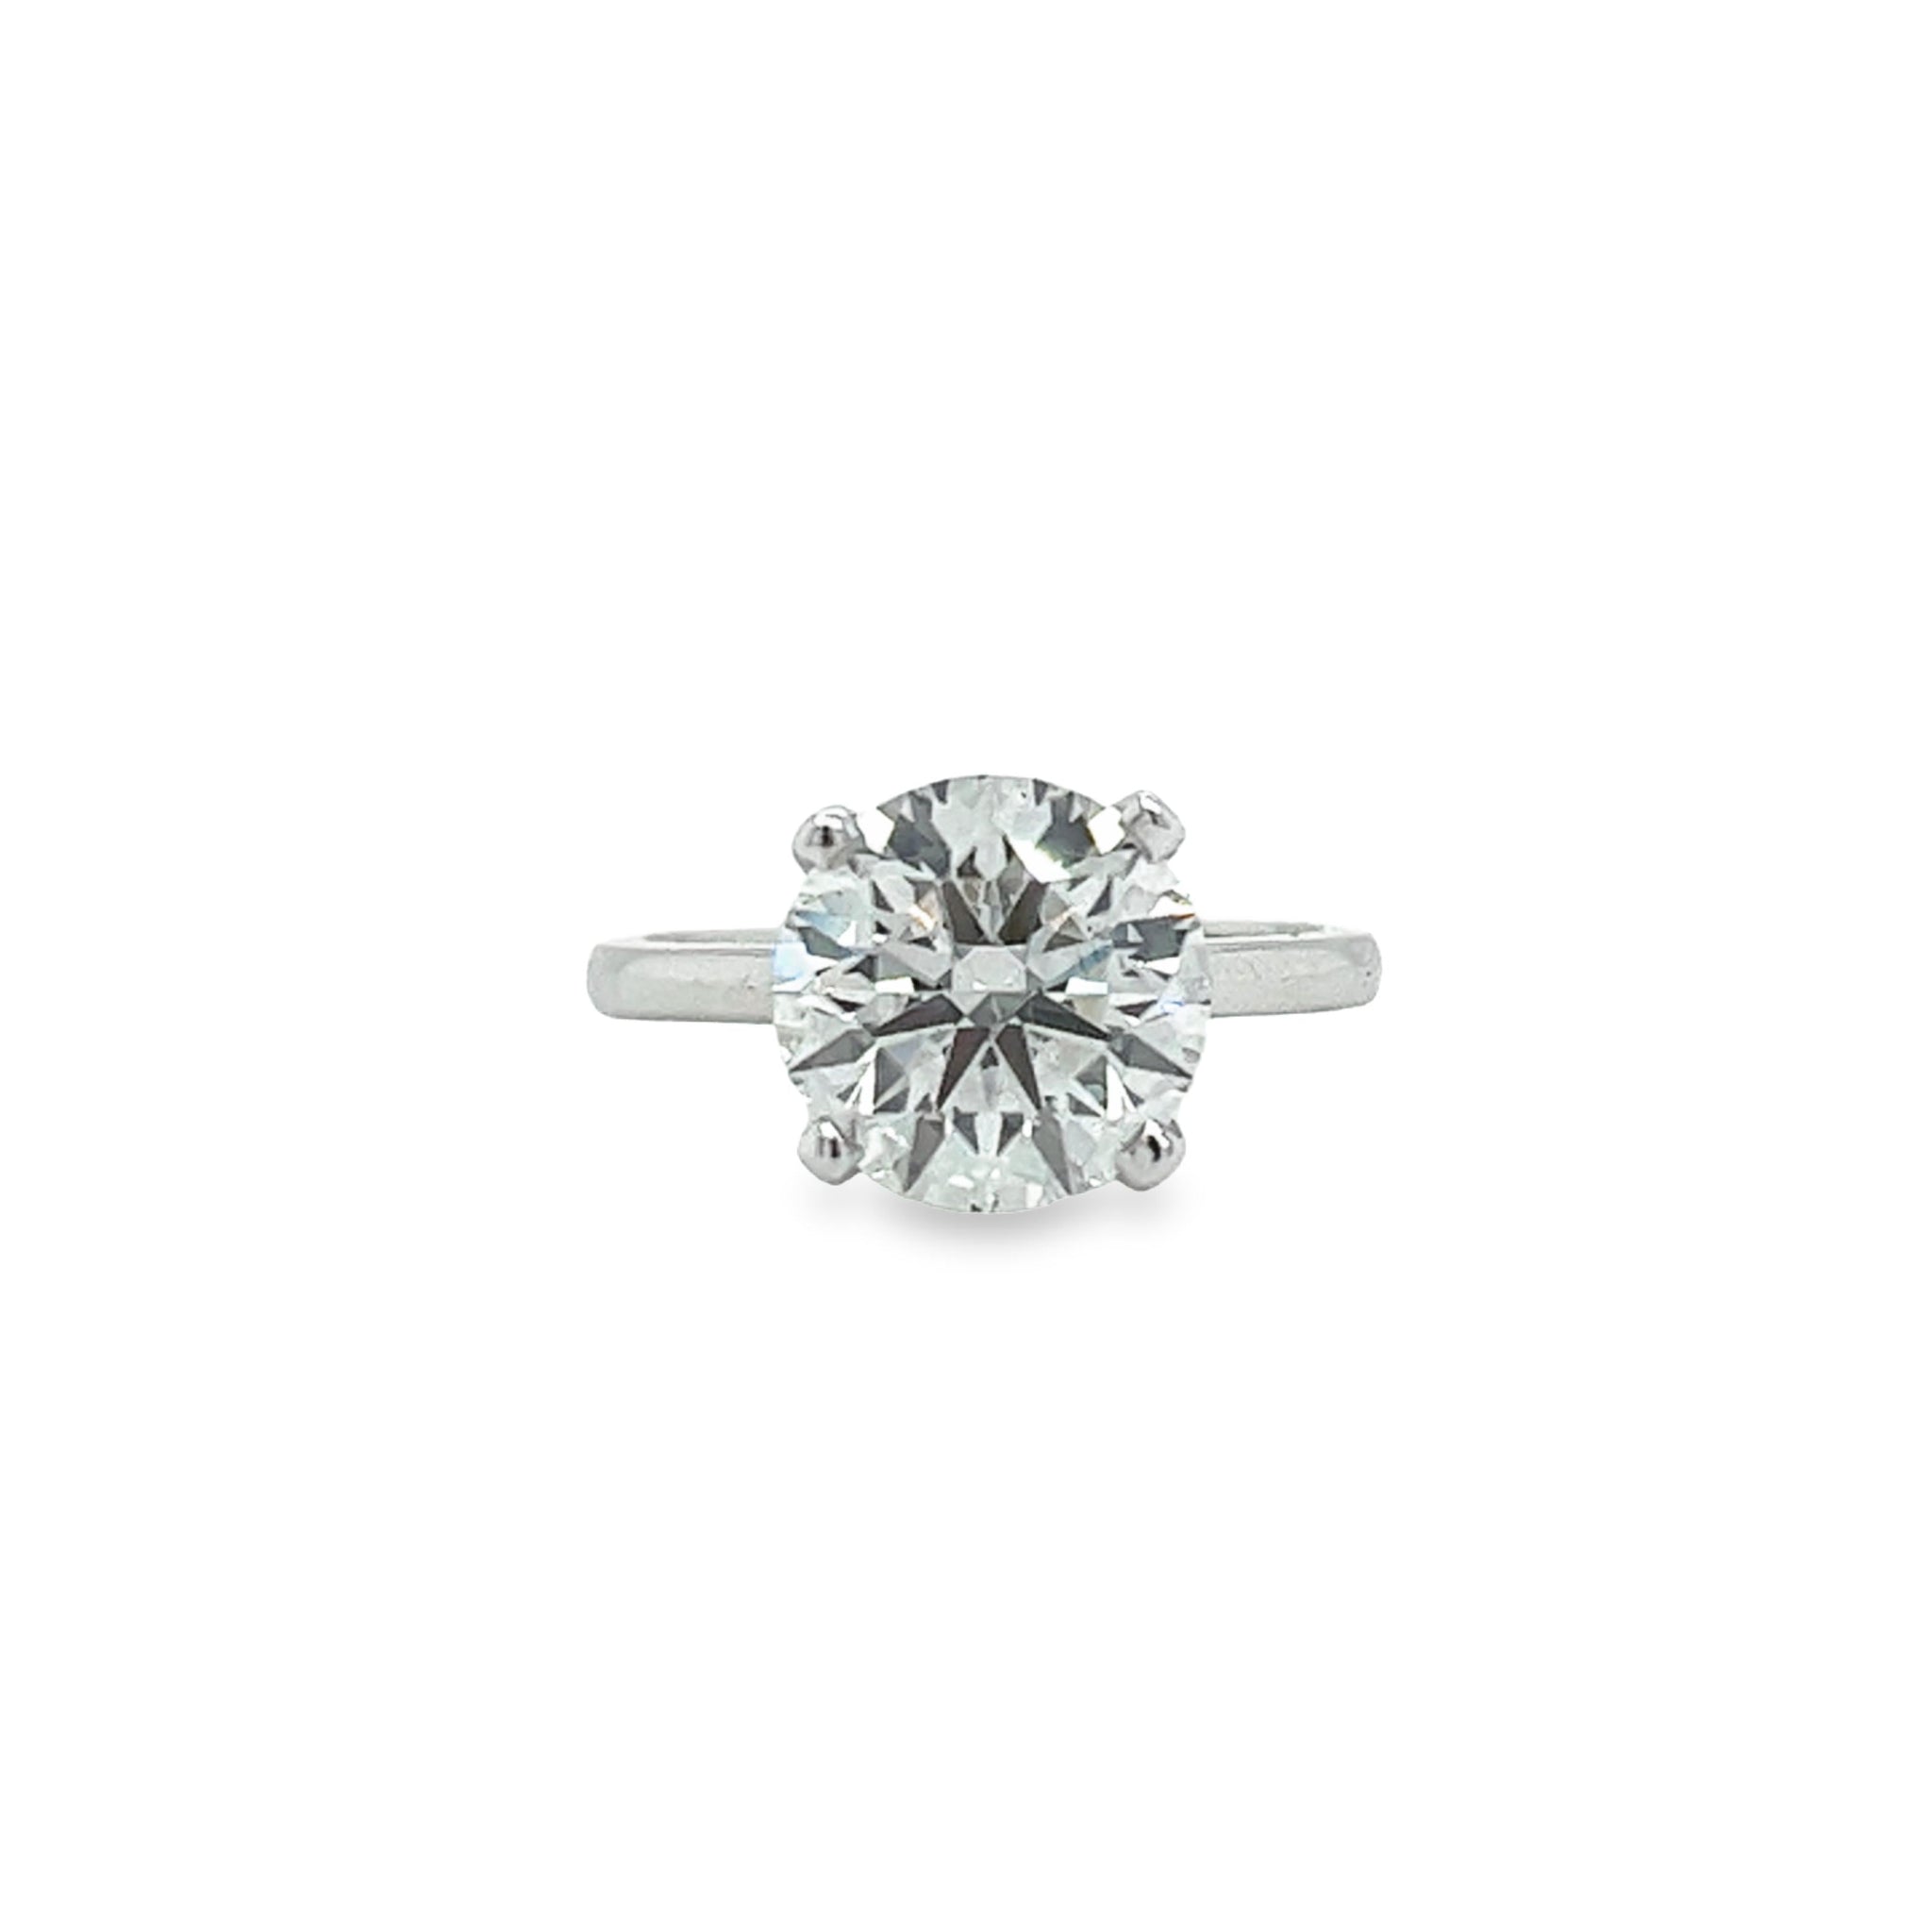 IGI Certified 3.48 Carat Round Cut Lab Grown Diamond CVD Engagement Ring in 18K White Gold Solitaire-engagement ring-ASSAY